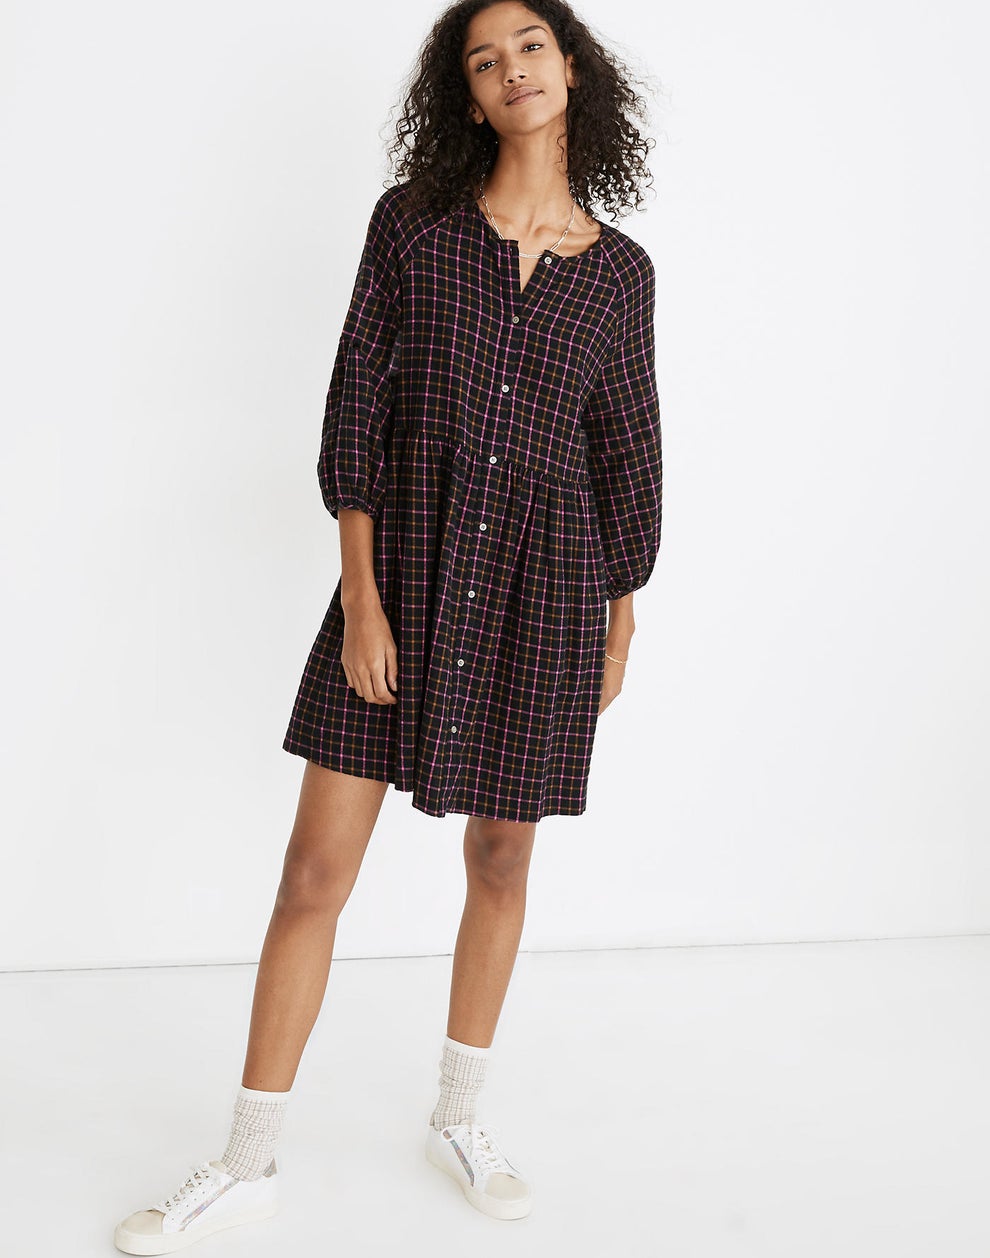 Madewell's Secret Stock Sale Is Here And That Means Up To 70% Off ...